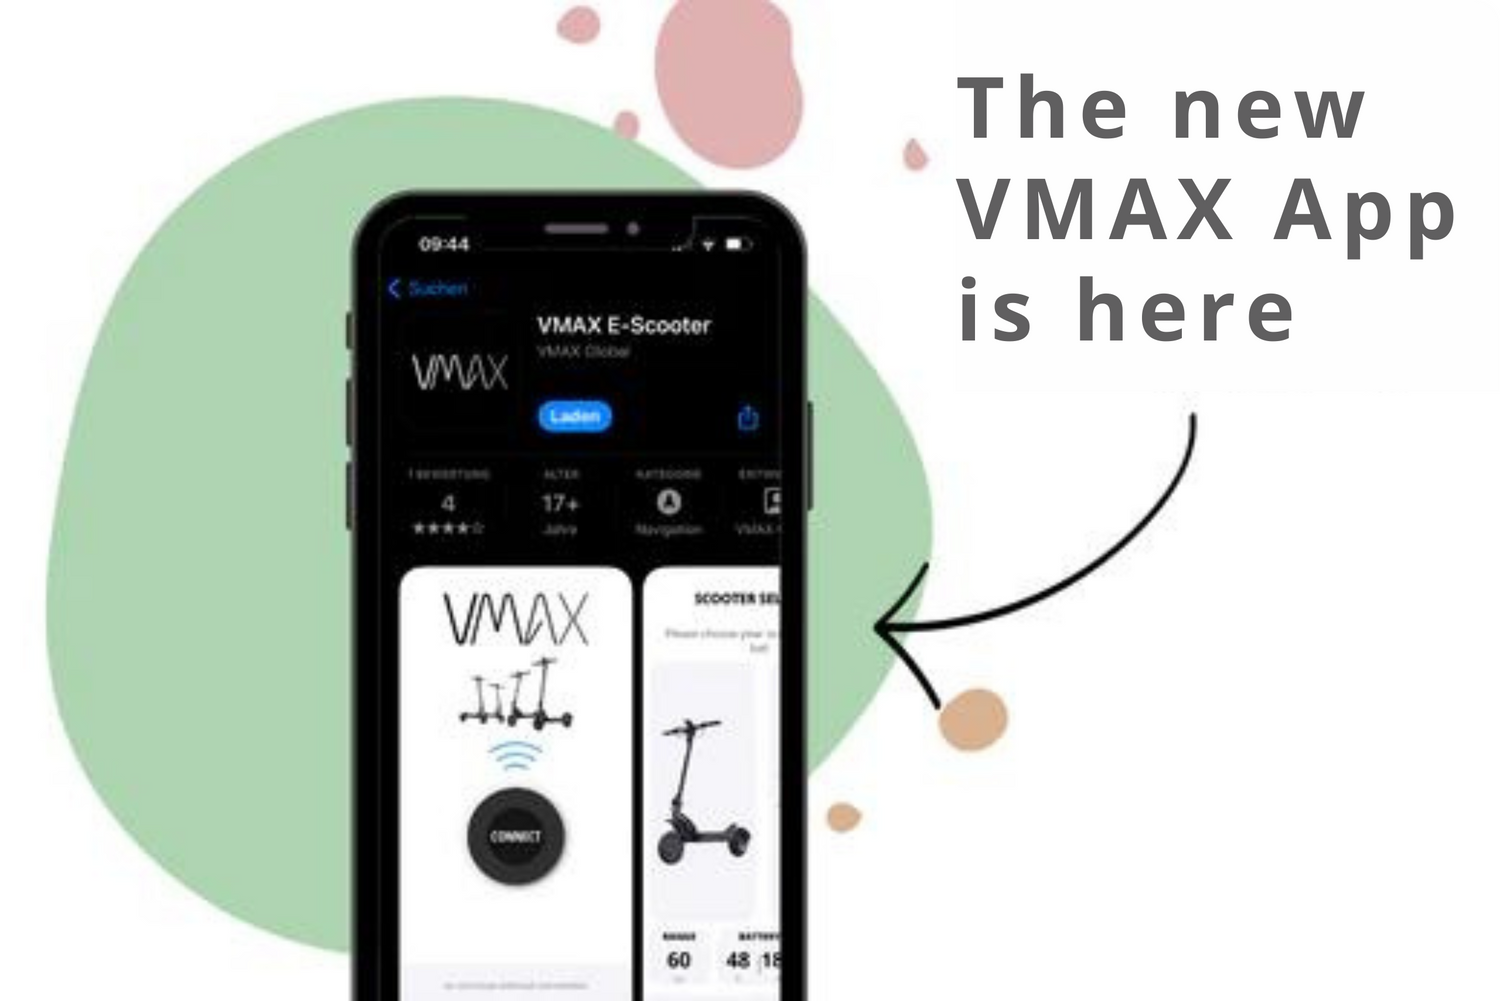 The Brand new VMAX App is Here